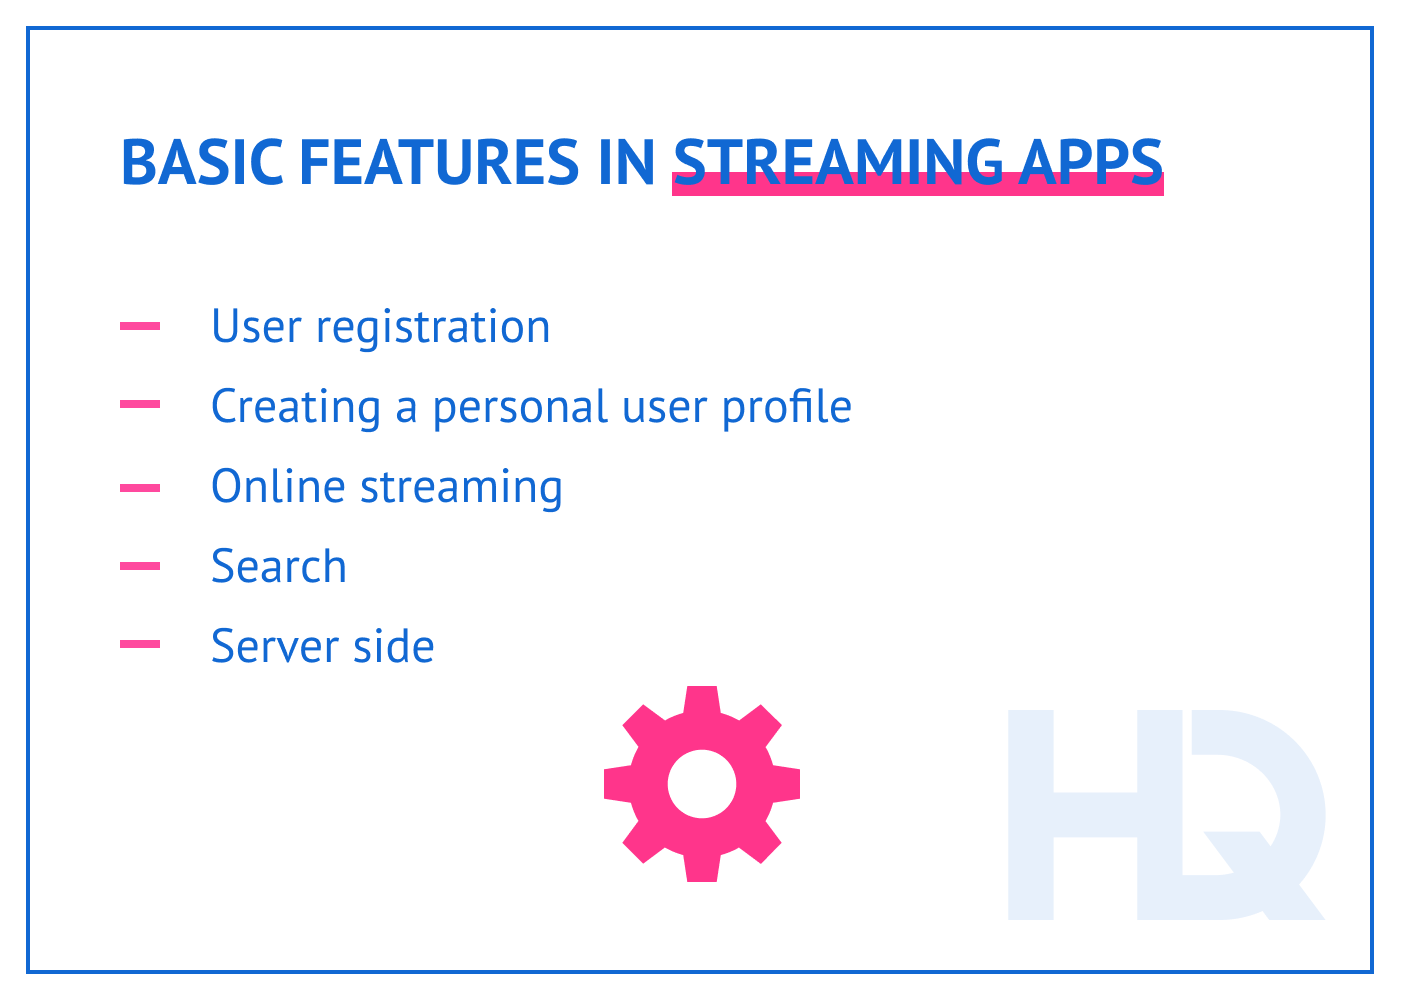 Basic features in streaming apps.